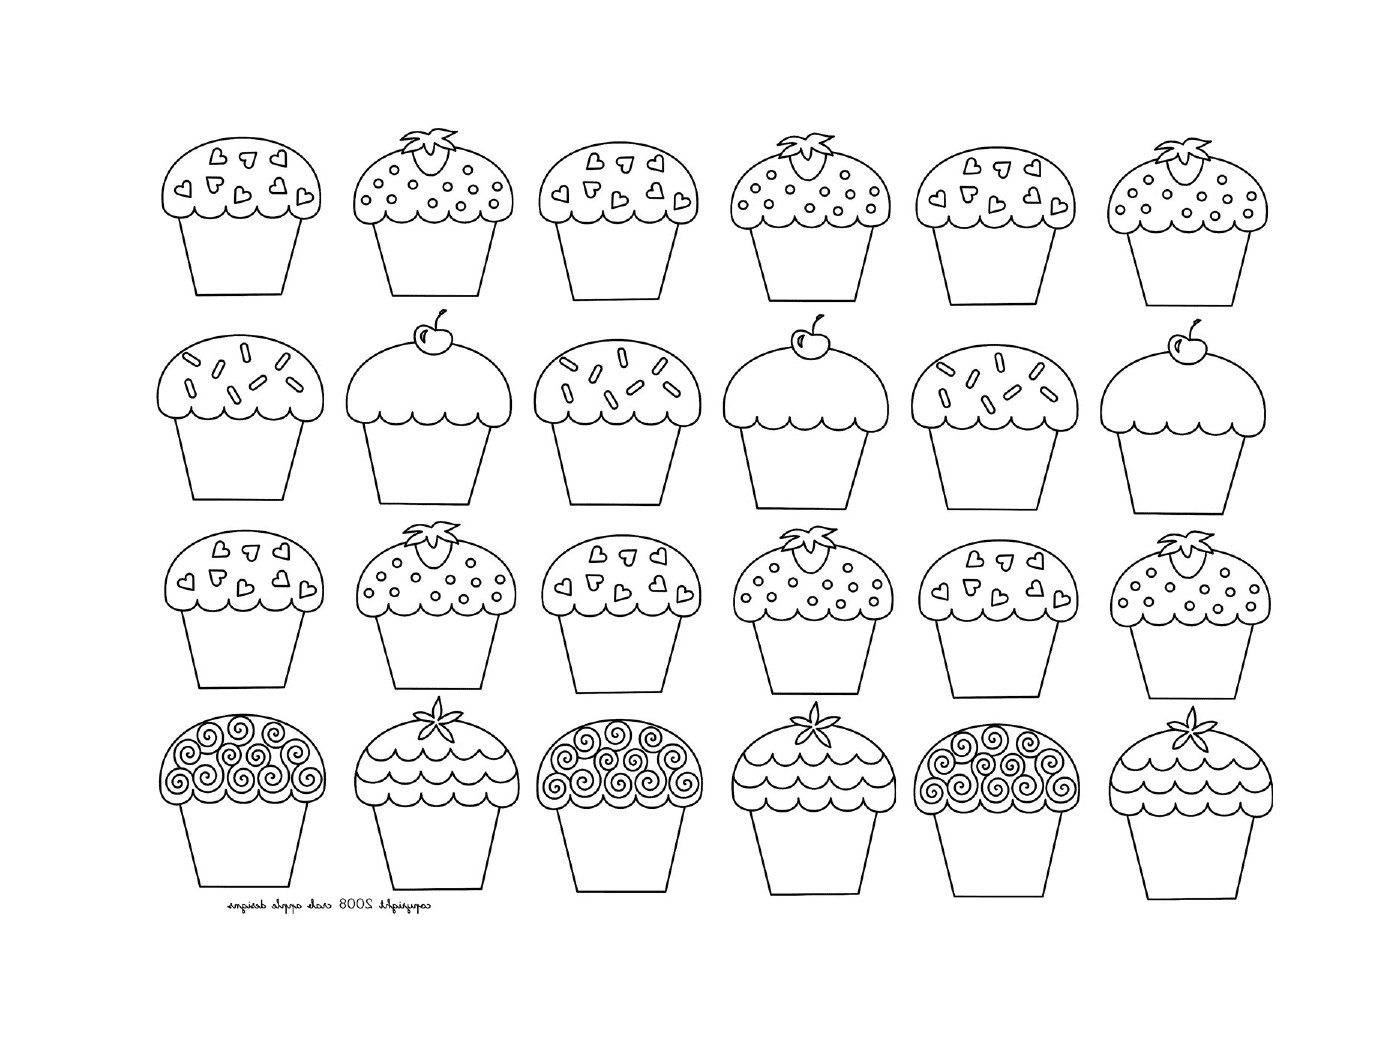  A mosaic of children's cupcakes, of different types 